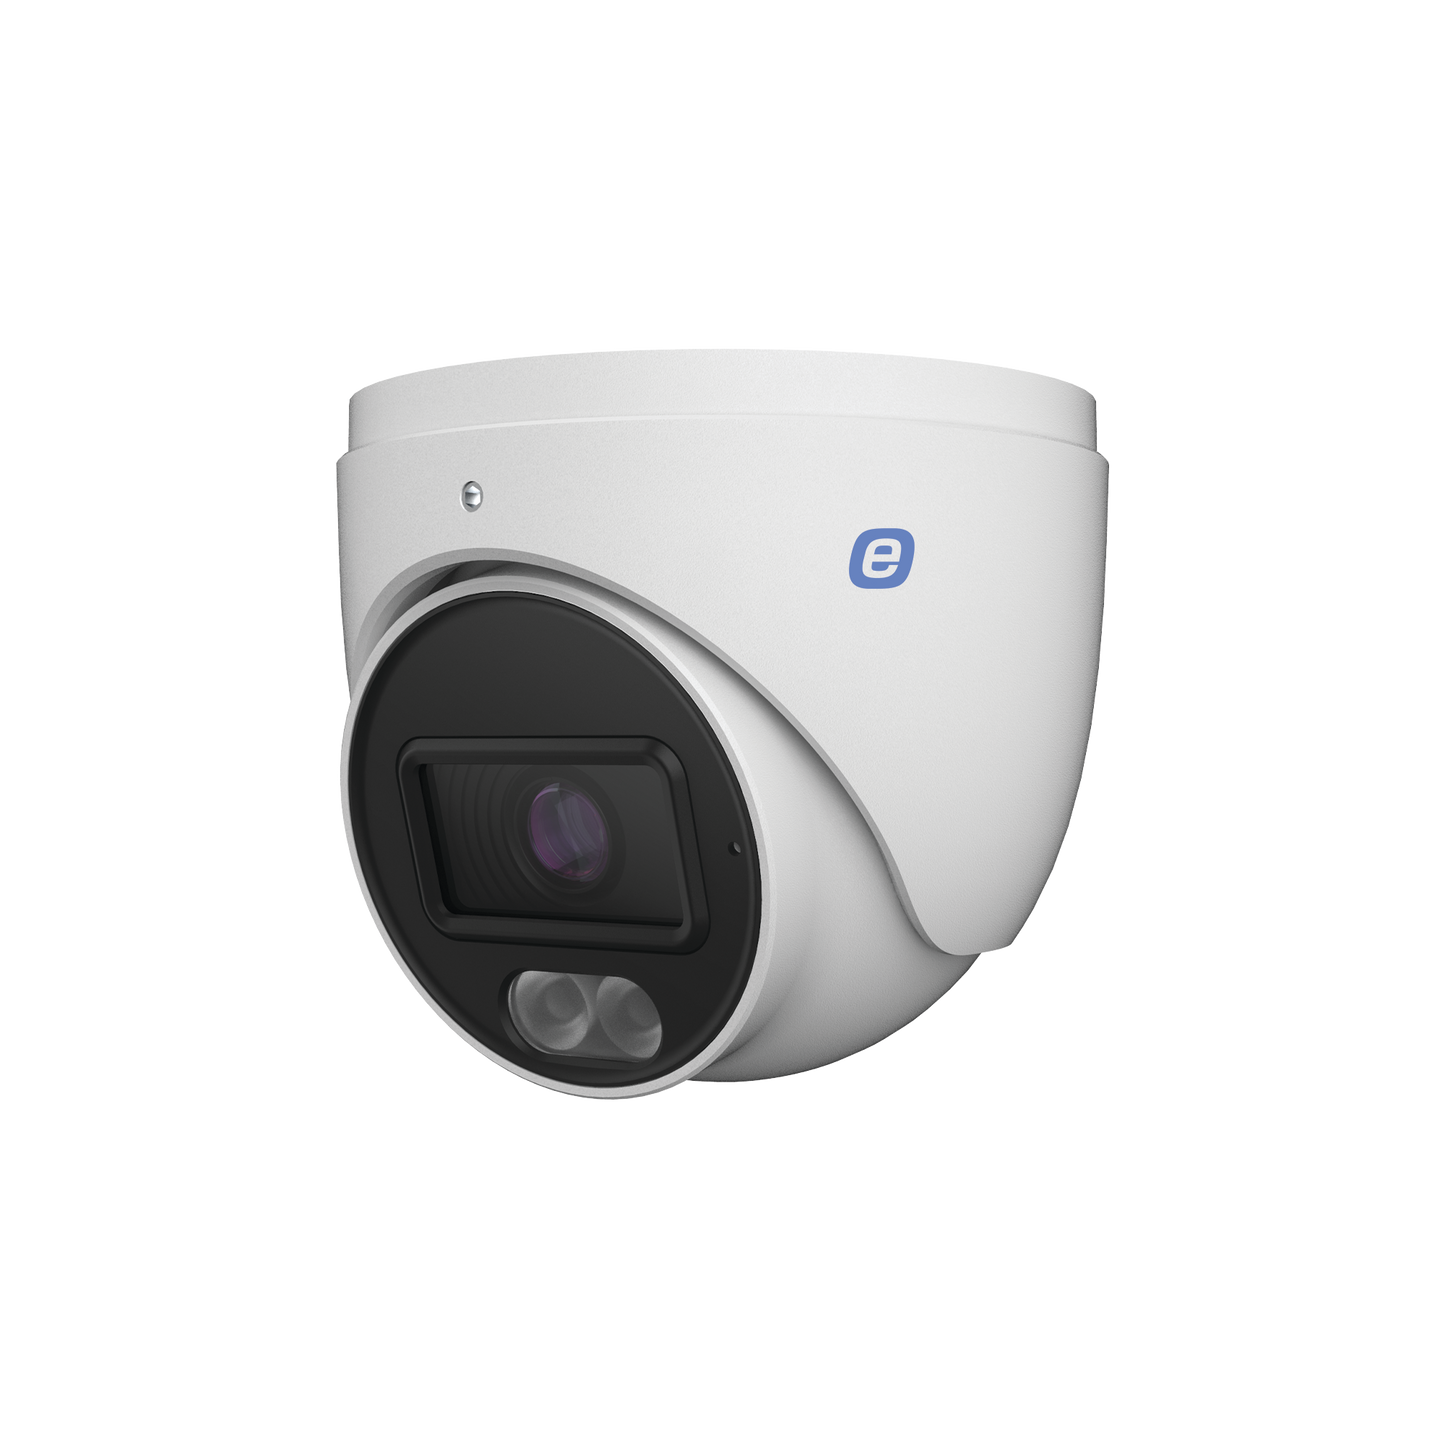 Turret IP 5MP / 24/7 Color Image / Advanced videoanalytics / POE / White Light 98ft (30m) / dWDR / Micro SD / IP67 / 2.8 mm Lens / Built-In Microphone / Cloud Video Recording / Metal Housing